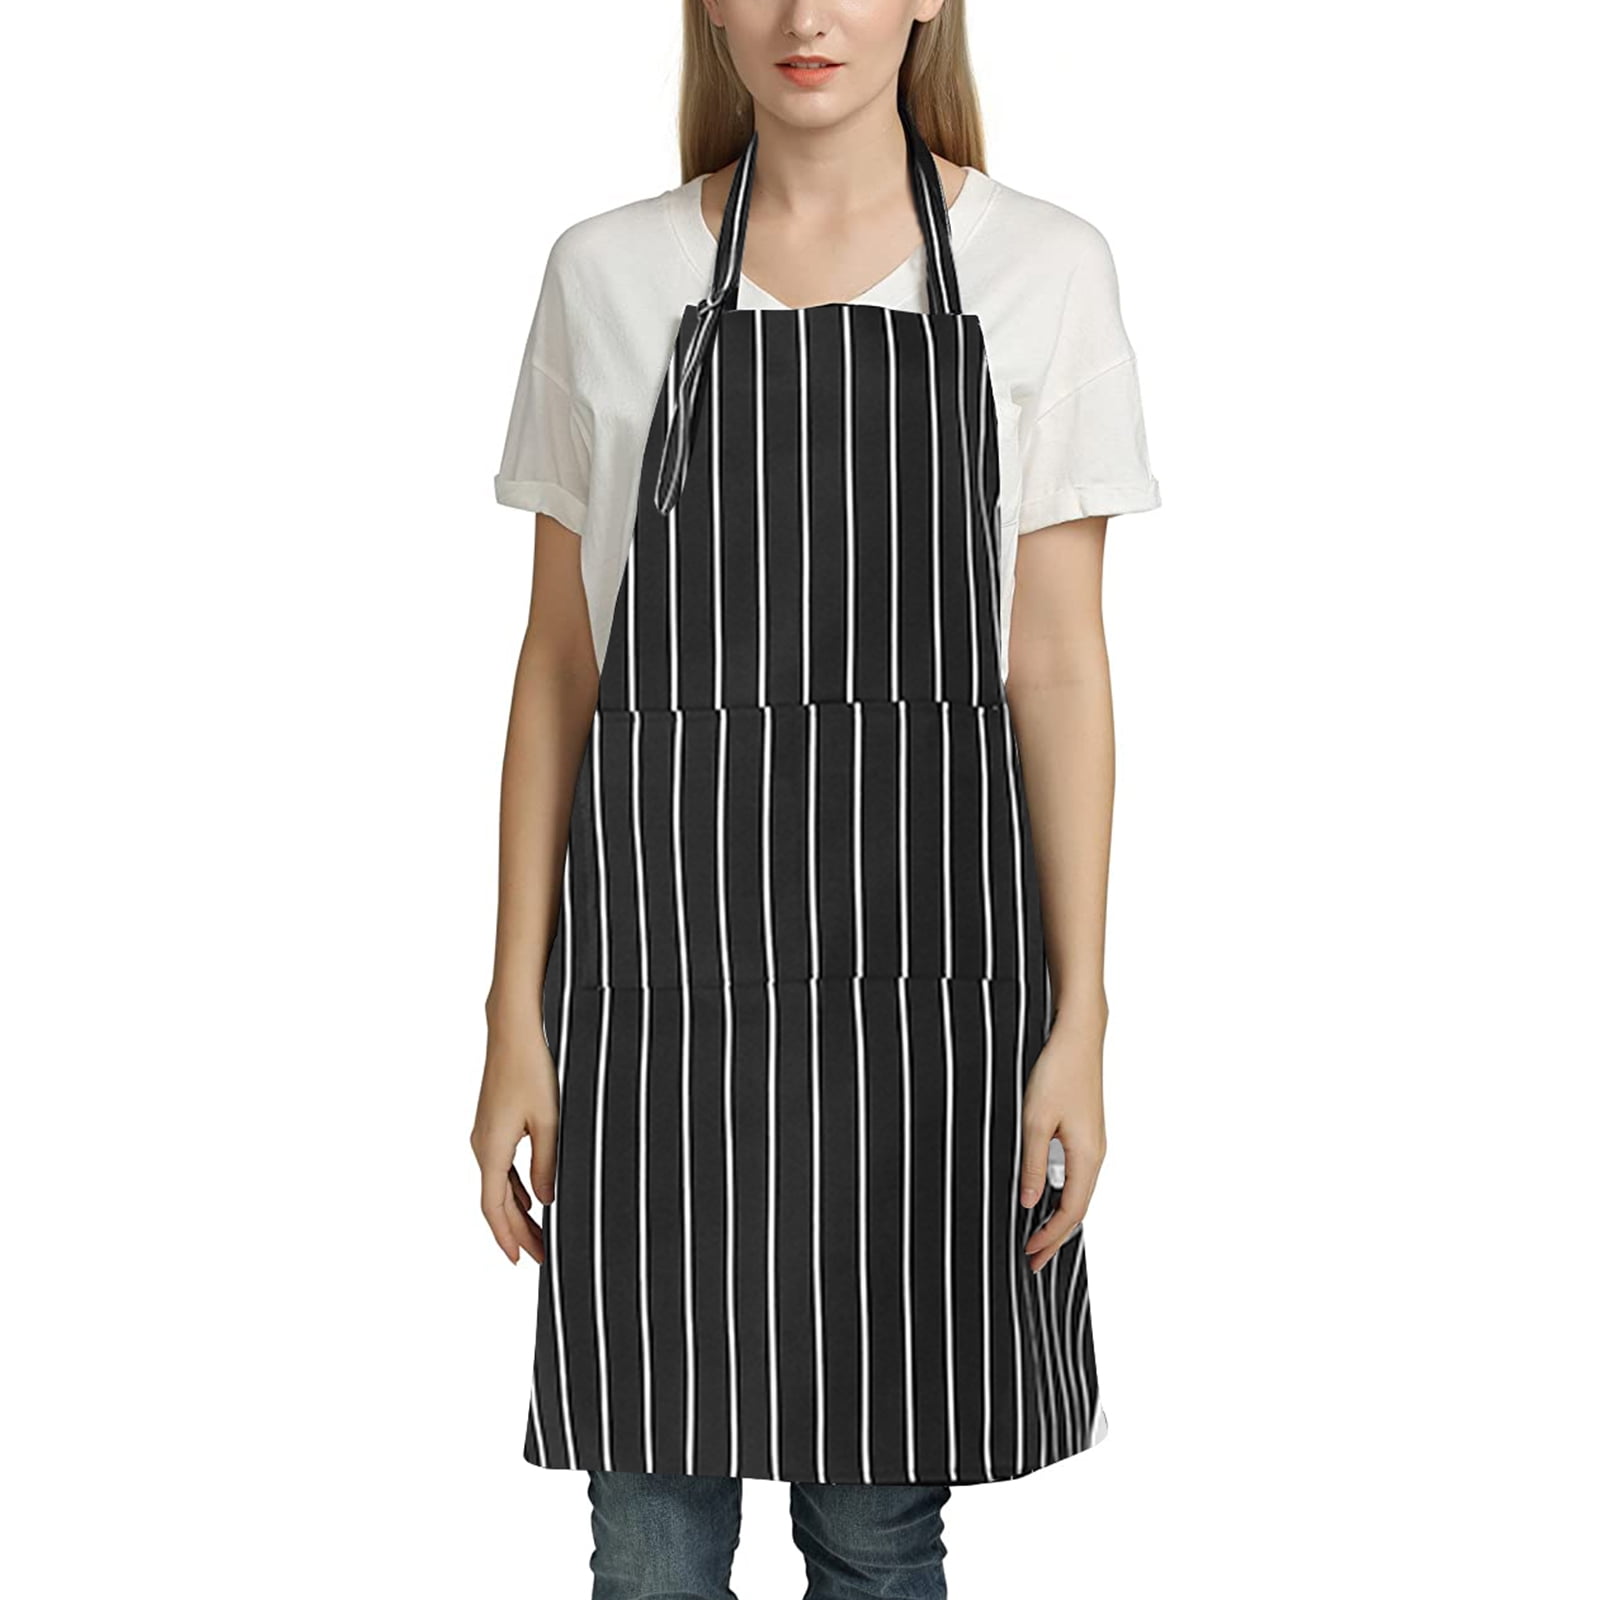 Funny Barbecue rates black chefs apron 2 pockets adjustable neck 2 back ties